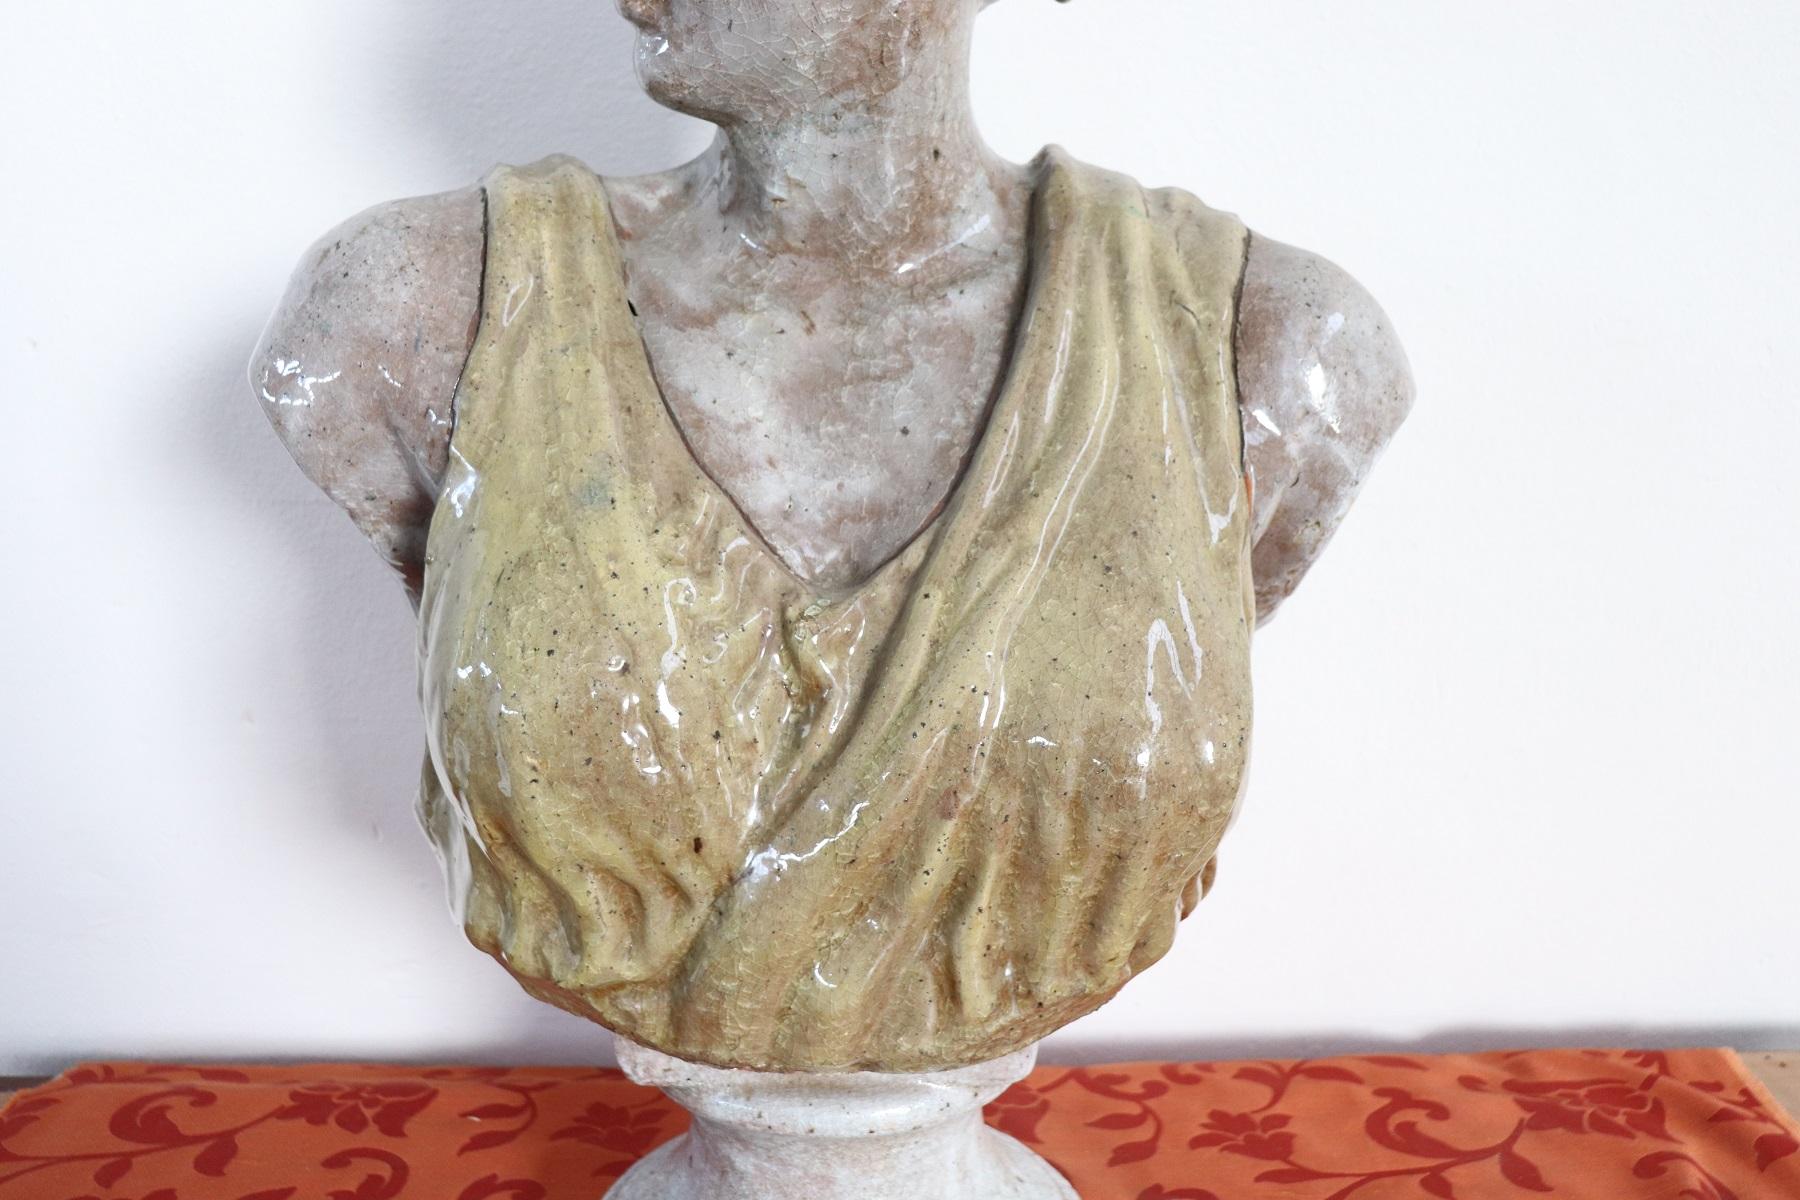 Large bust of ancient Roman woman. Handmade in terracotta painted and decorated with glazed technique. Refined classical Italian tradition sculpture.
This sculpture is proposed for you at an excellent price. Buy from us only true antiques from the